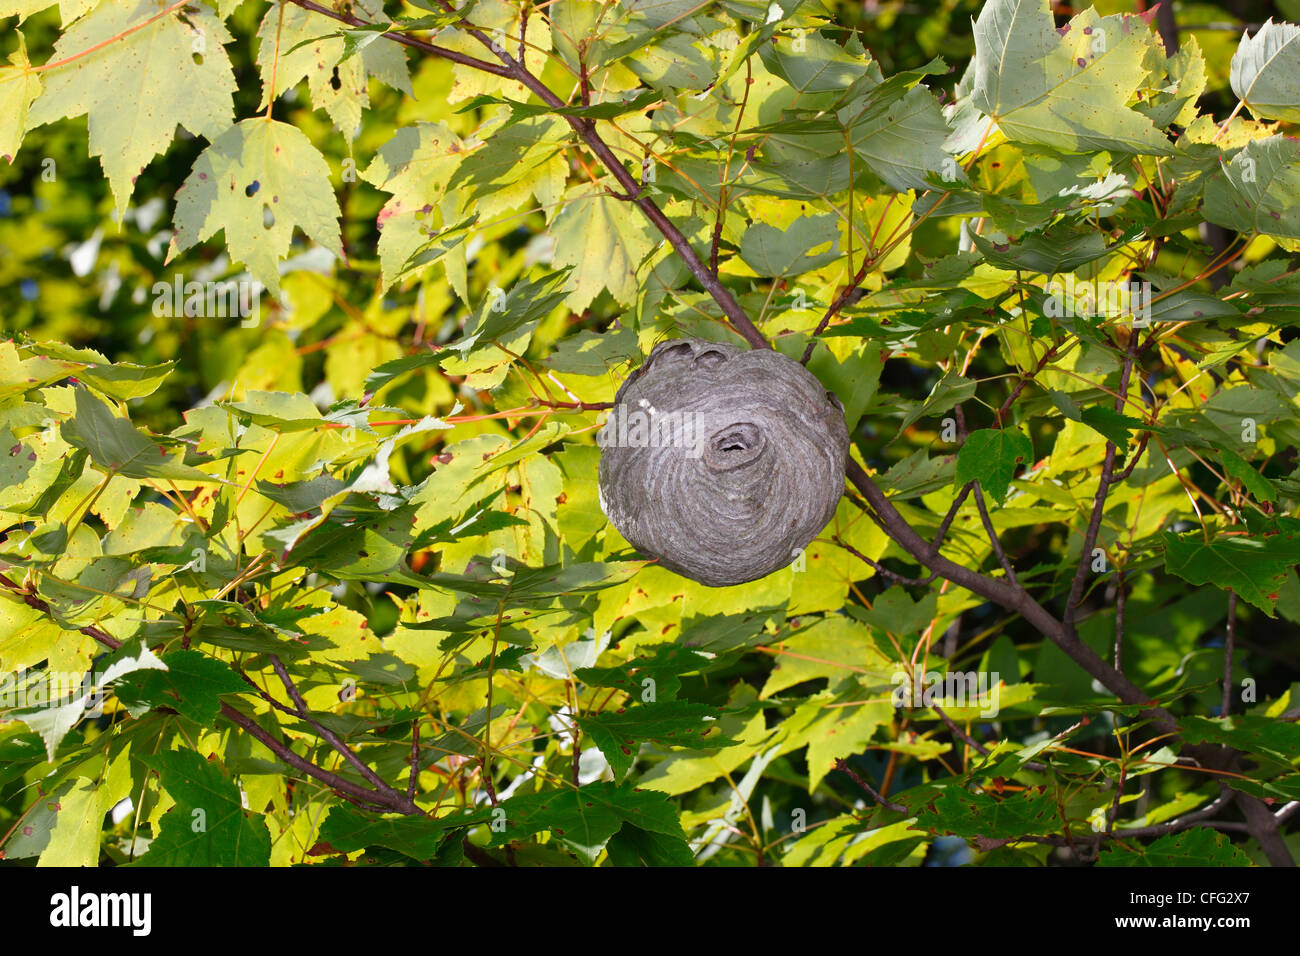 A white-faced hornet nest, Dolichovespula maculalata, in a maple tree. Stock Photo